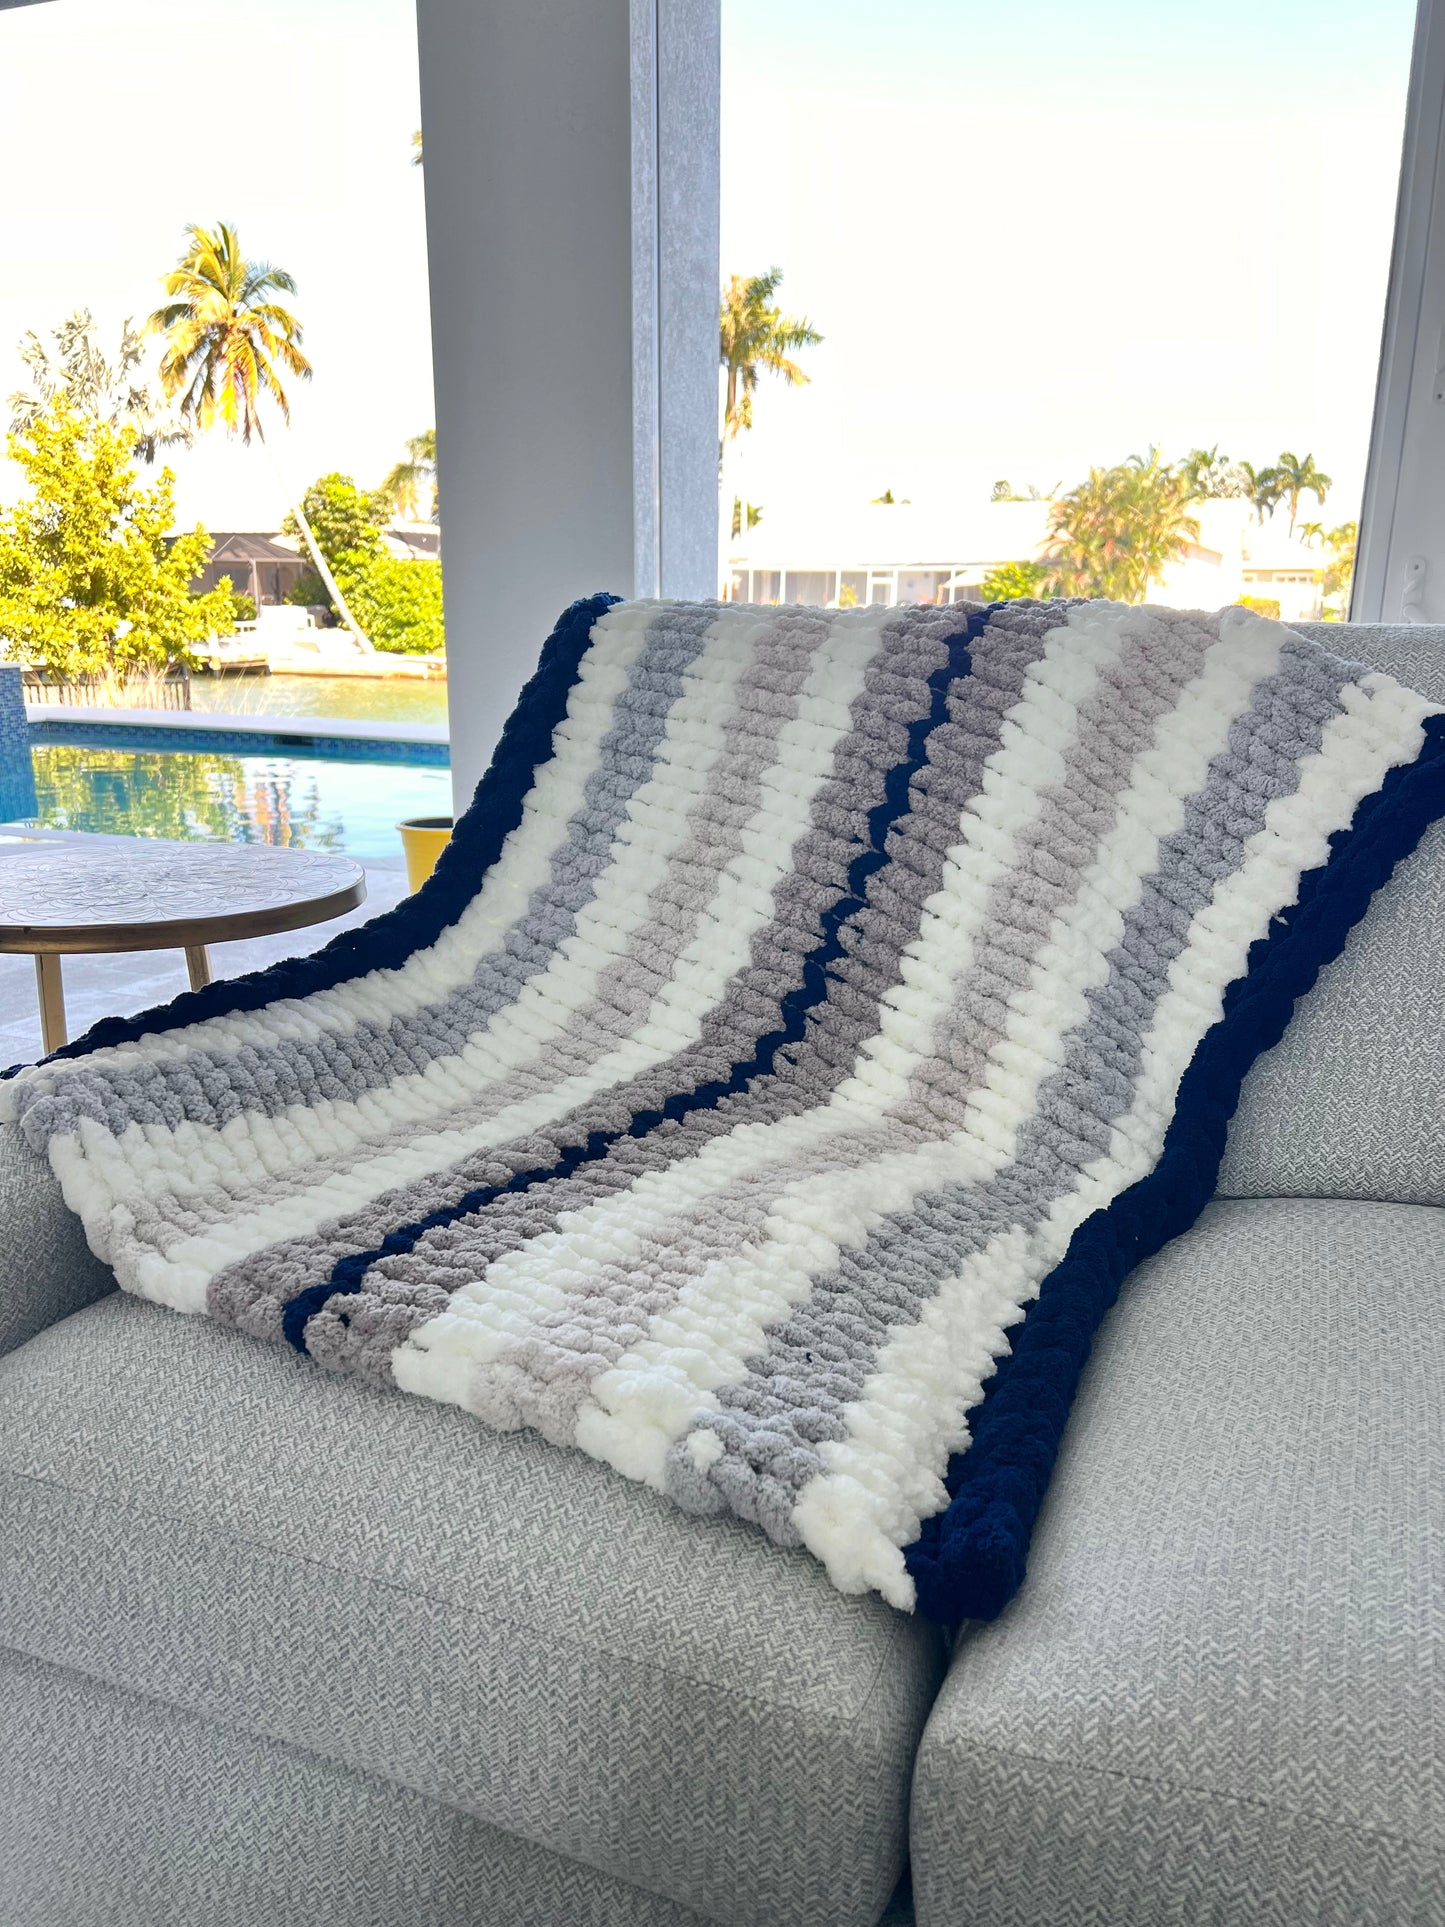 Baby Chunky Knit Blanket